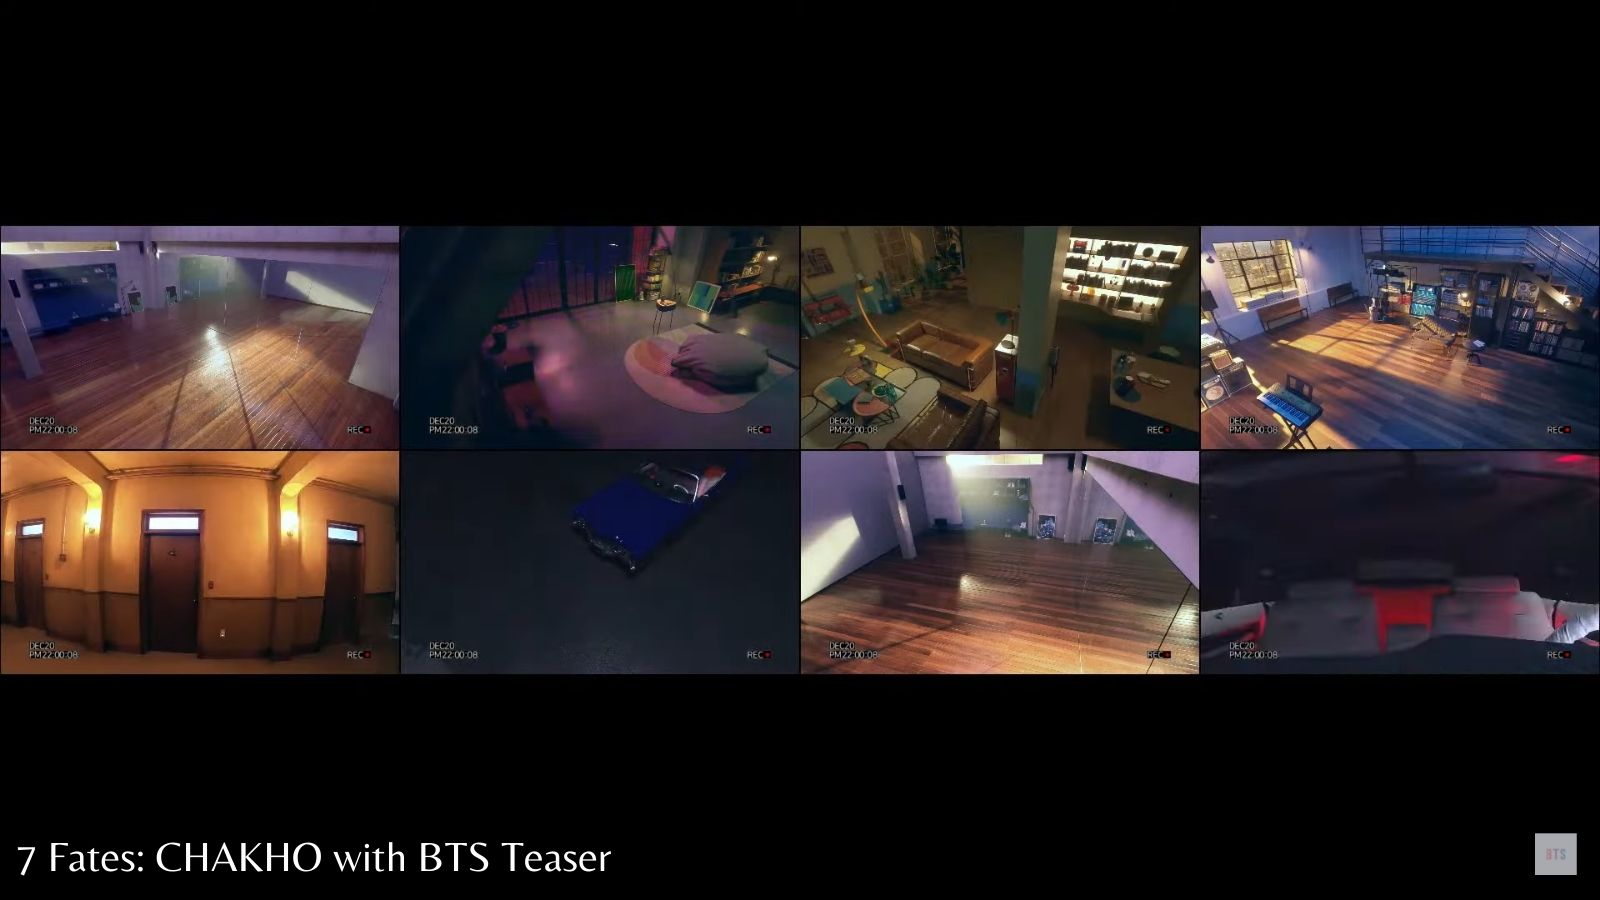 7 Fates CHAKHO with BTS cctv Teaser